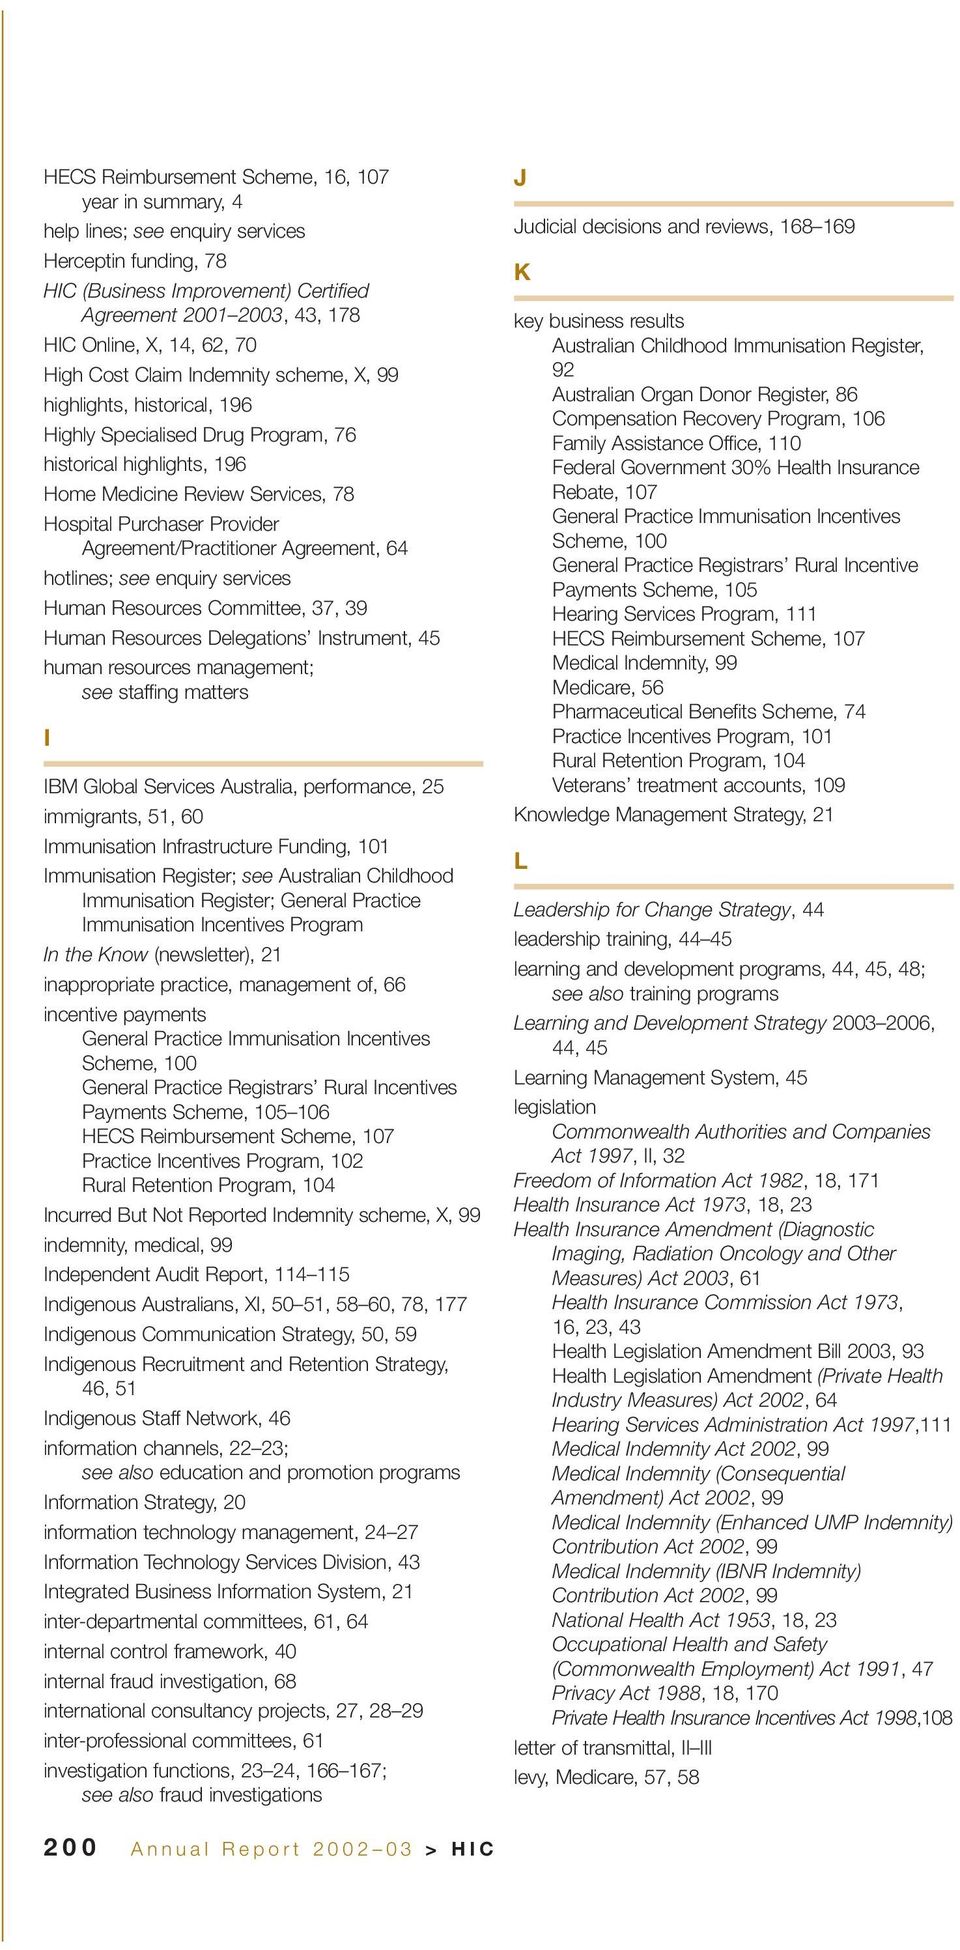 Agreement, 64 hotlines; see enquiry services Human Resources Committee, 37, 39 Human Resources Delegations Instrument, 45 human resources management; see staffing matters I IBM Global Services